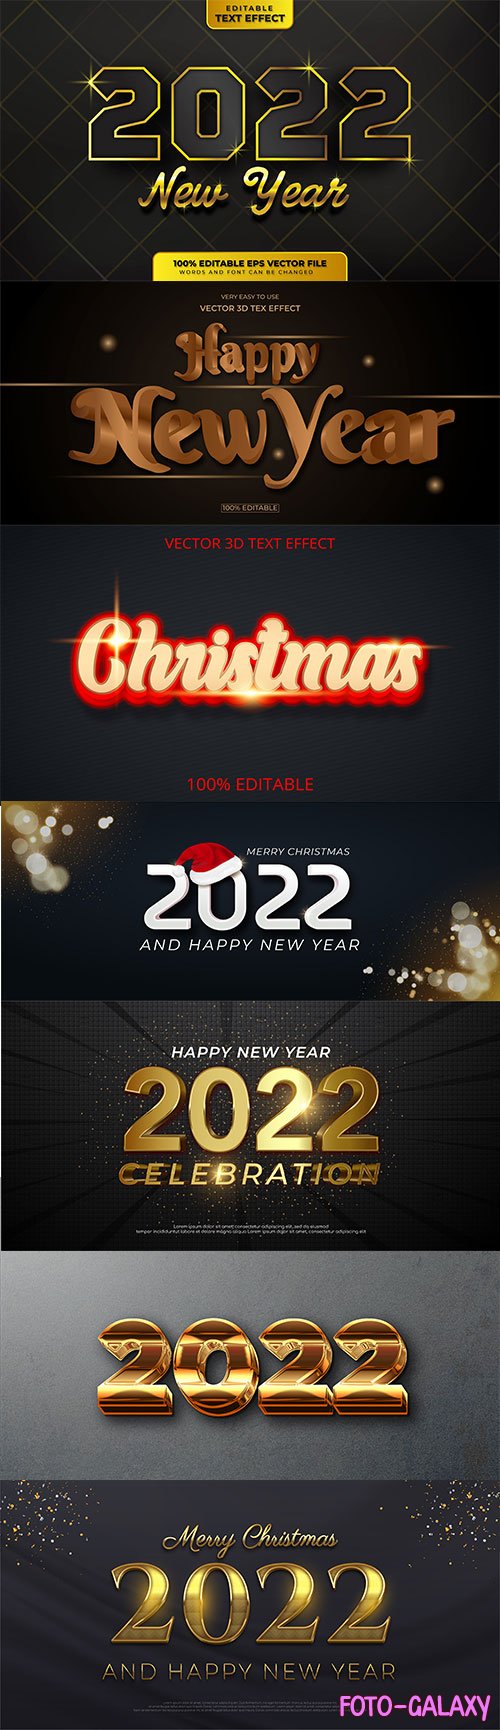 2022 New year and christmas editable text effect vector vol 25